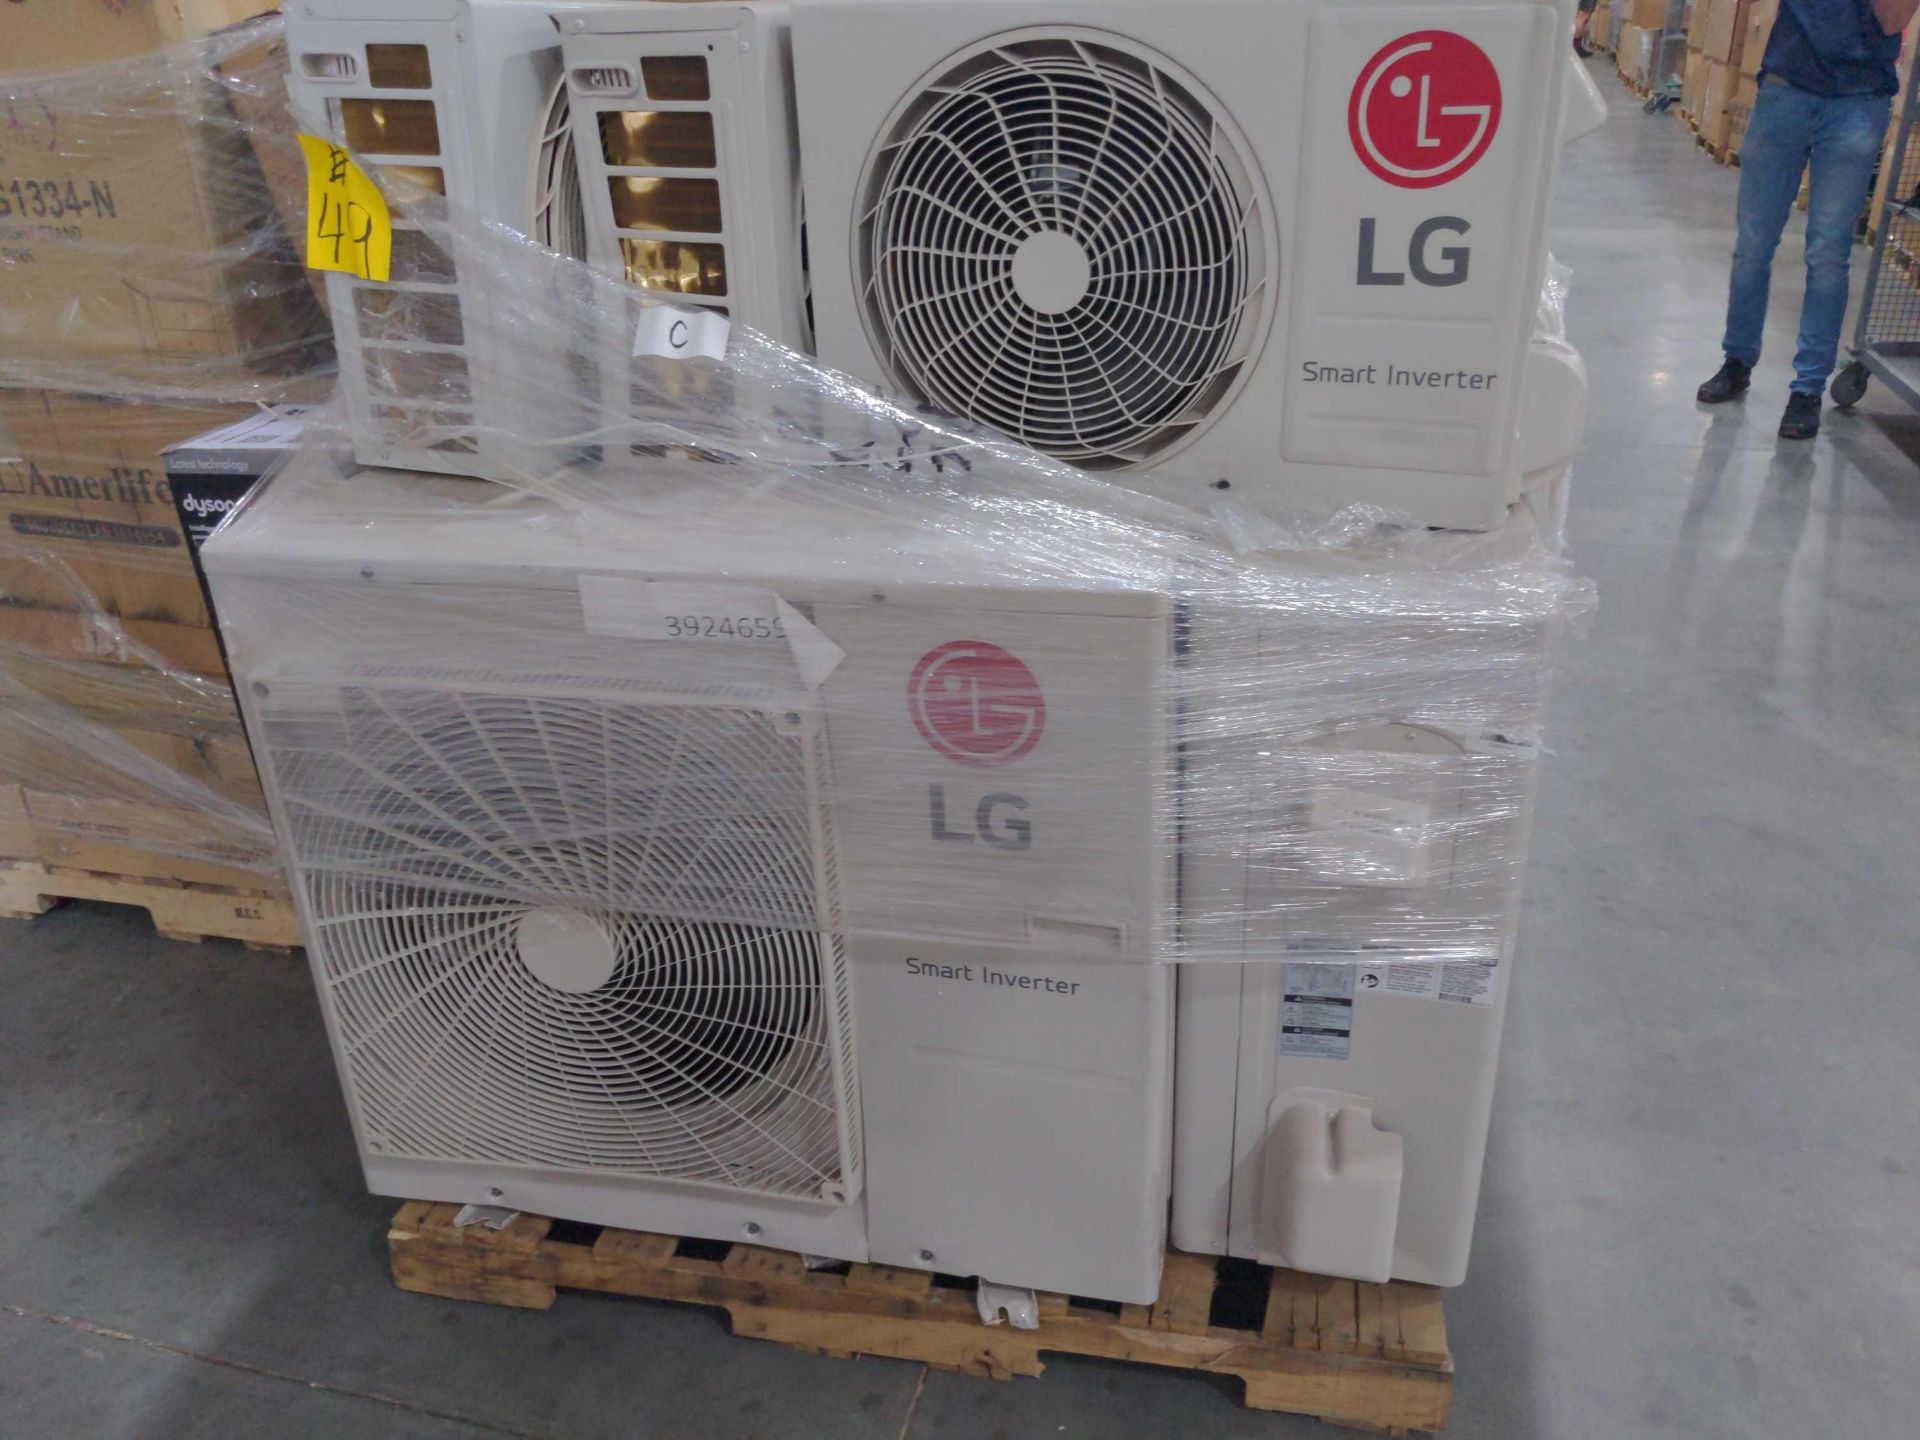 LG Air Conditioners - Image 7 of 11